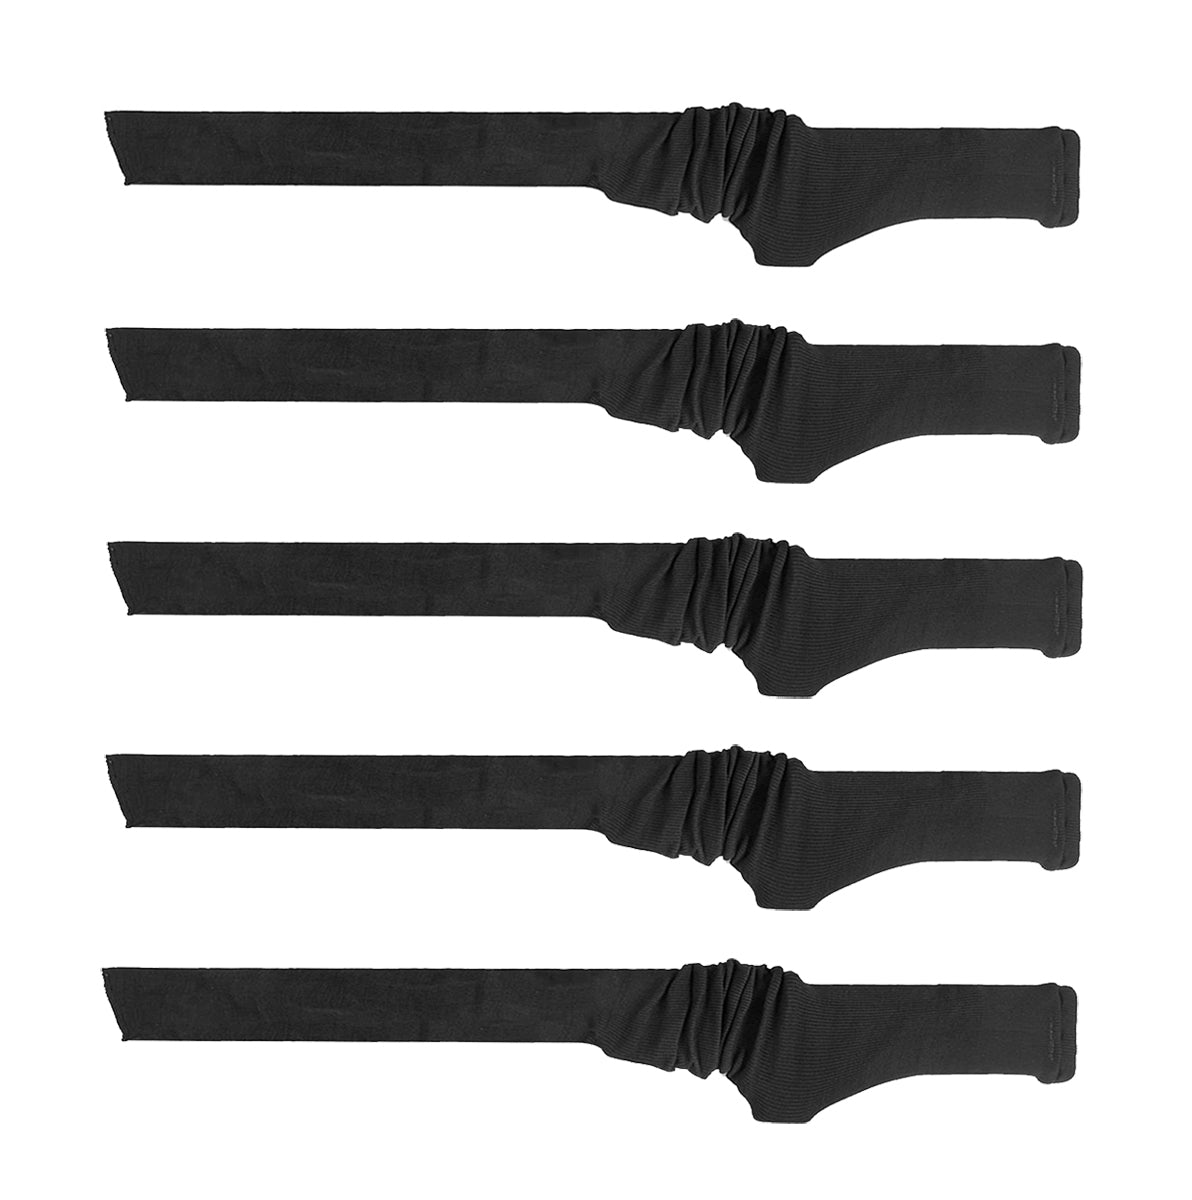 5 Pack Gun Socks for Rifles with Scope, Silicone-Treated Knit Rifle Gun Sock Gun Sleeve for Storage, Anti-Rust, Drawstring Closure, Mixed Color